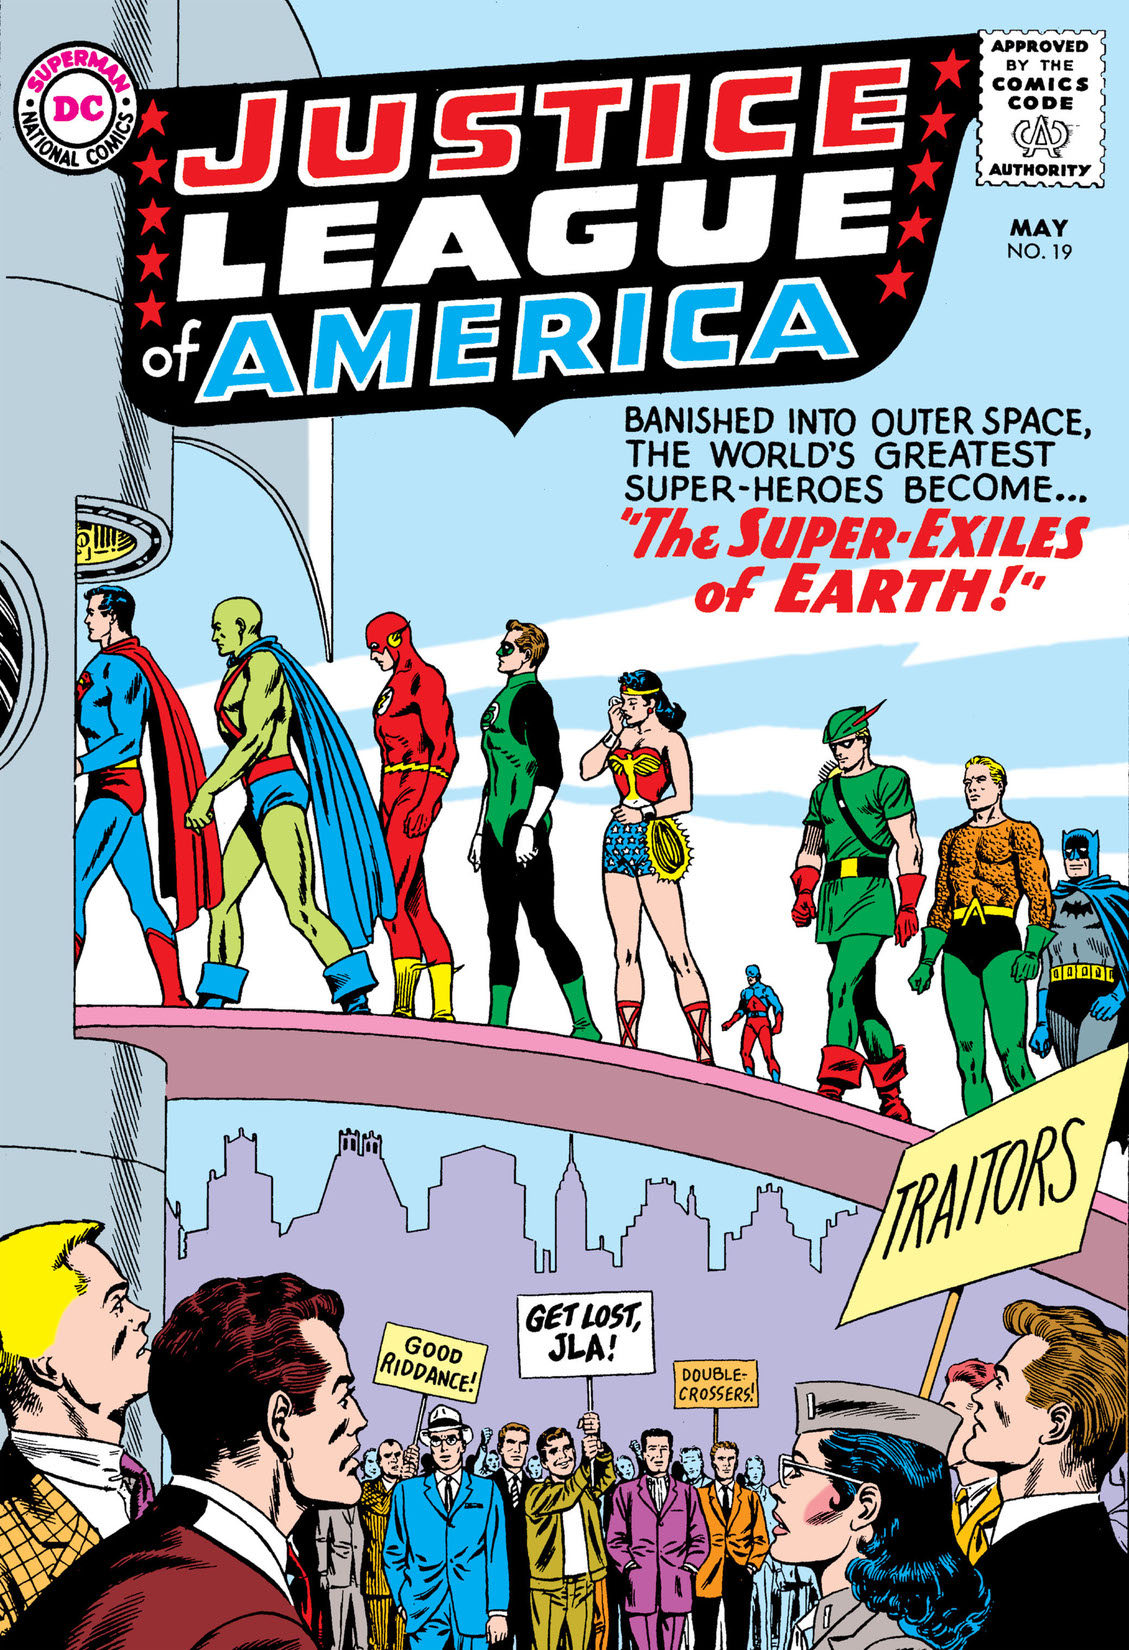 Justice League of America (1960-) #19 preview images